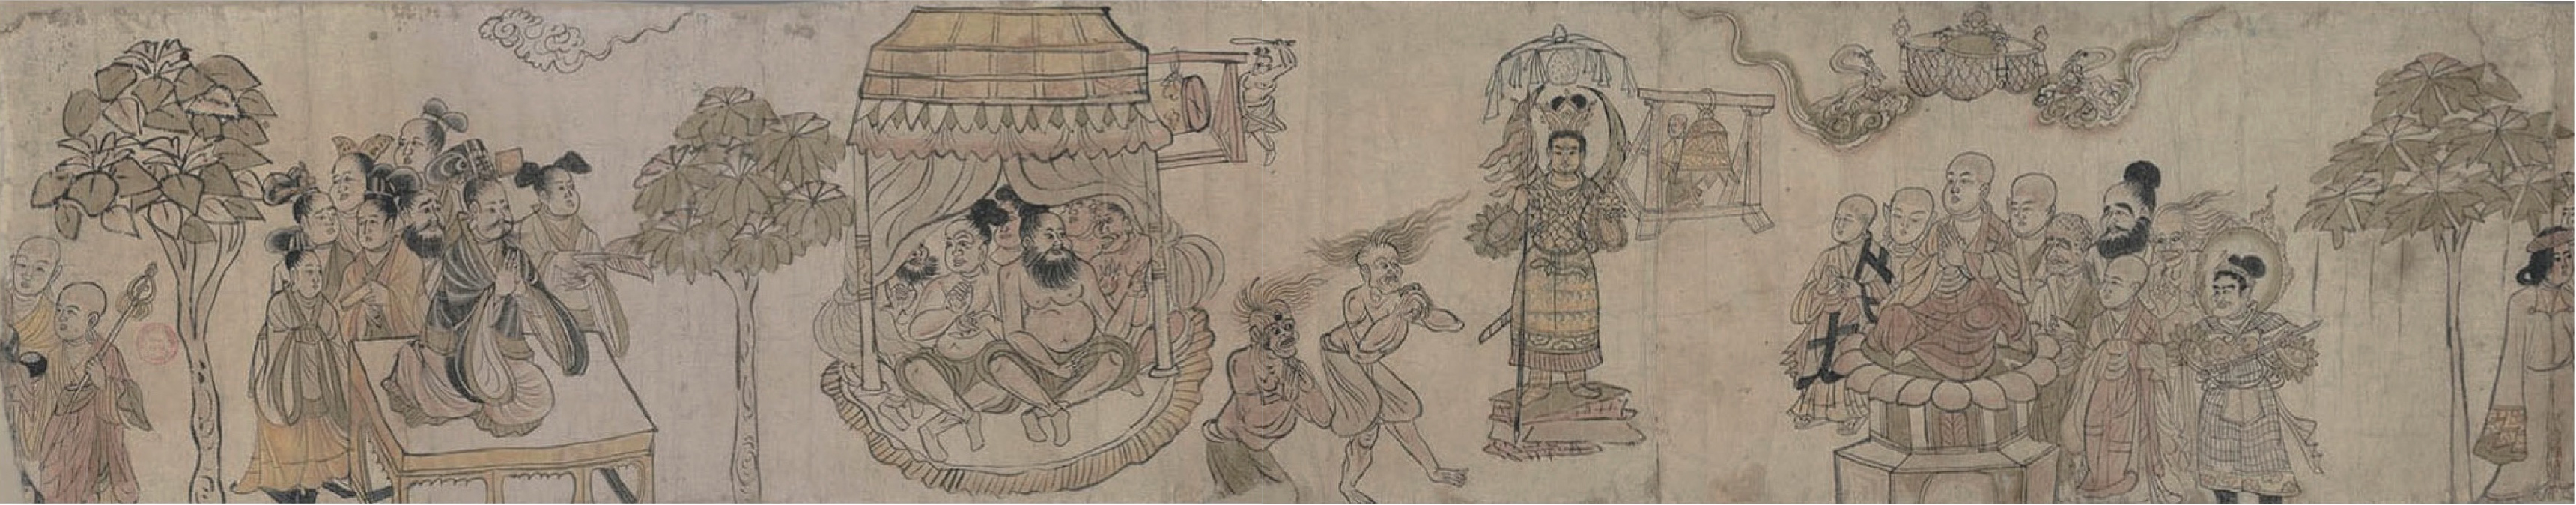 Figure 10: Detail of the scroll of "Conquering the Demons and Bianwen", showing a fighting plot